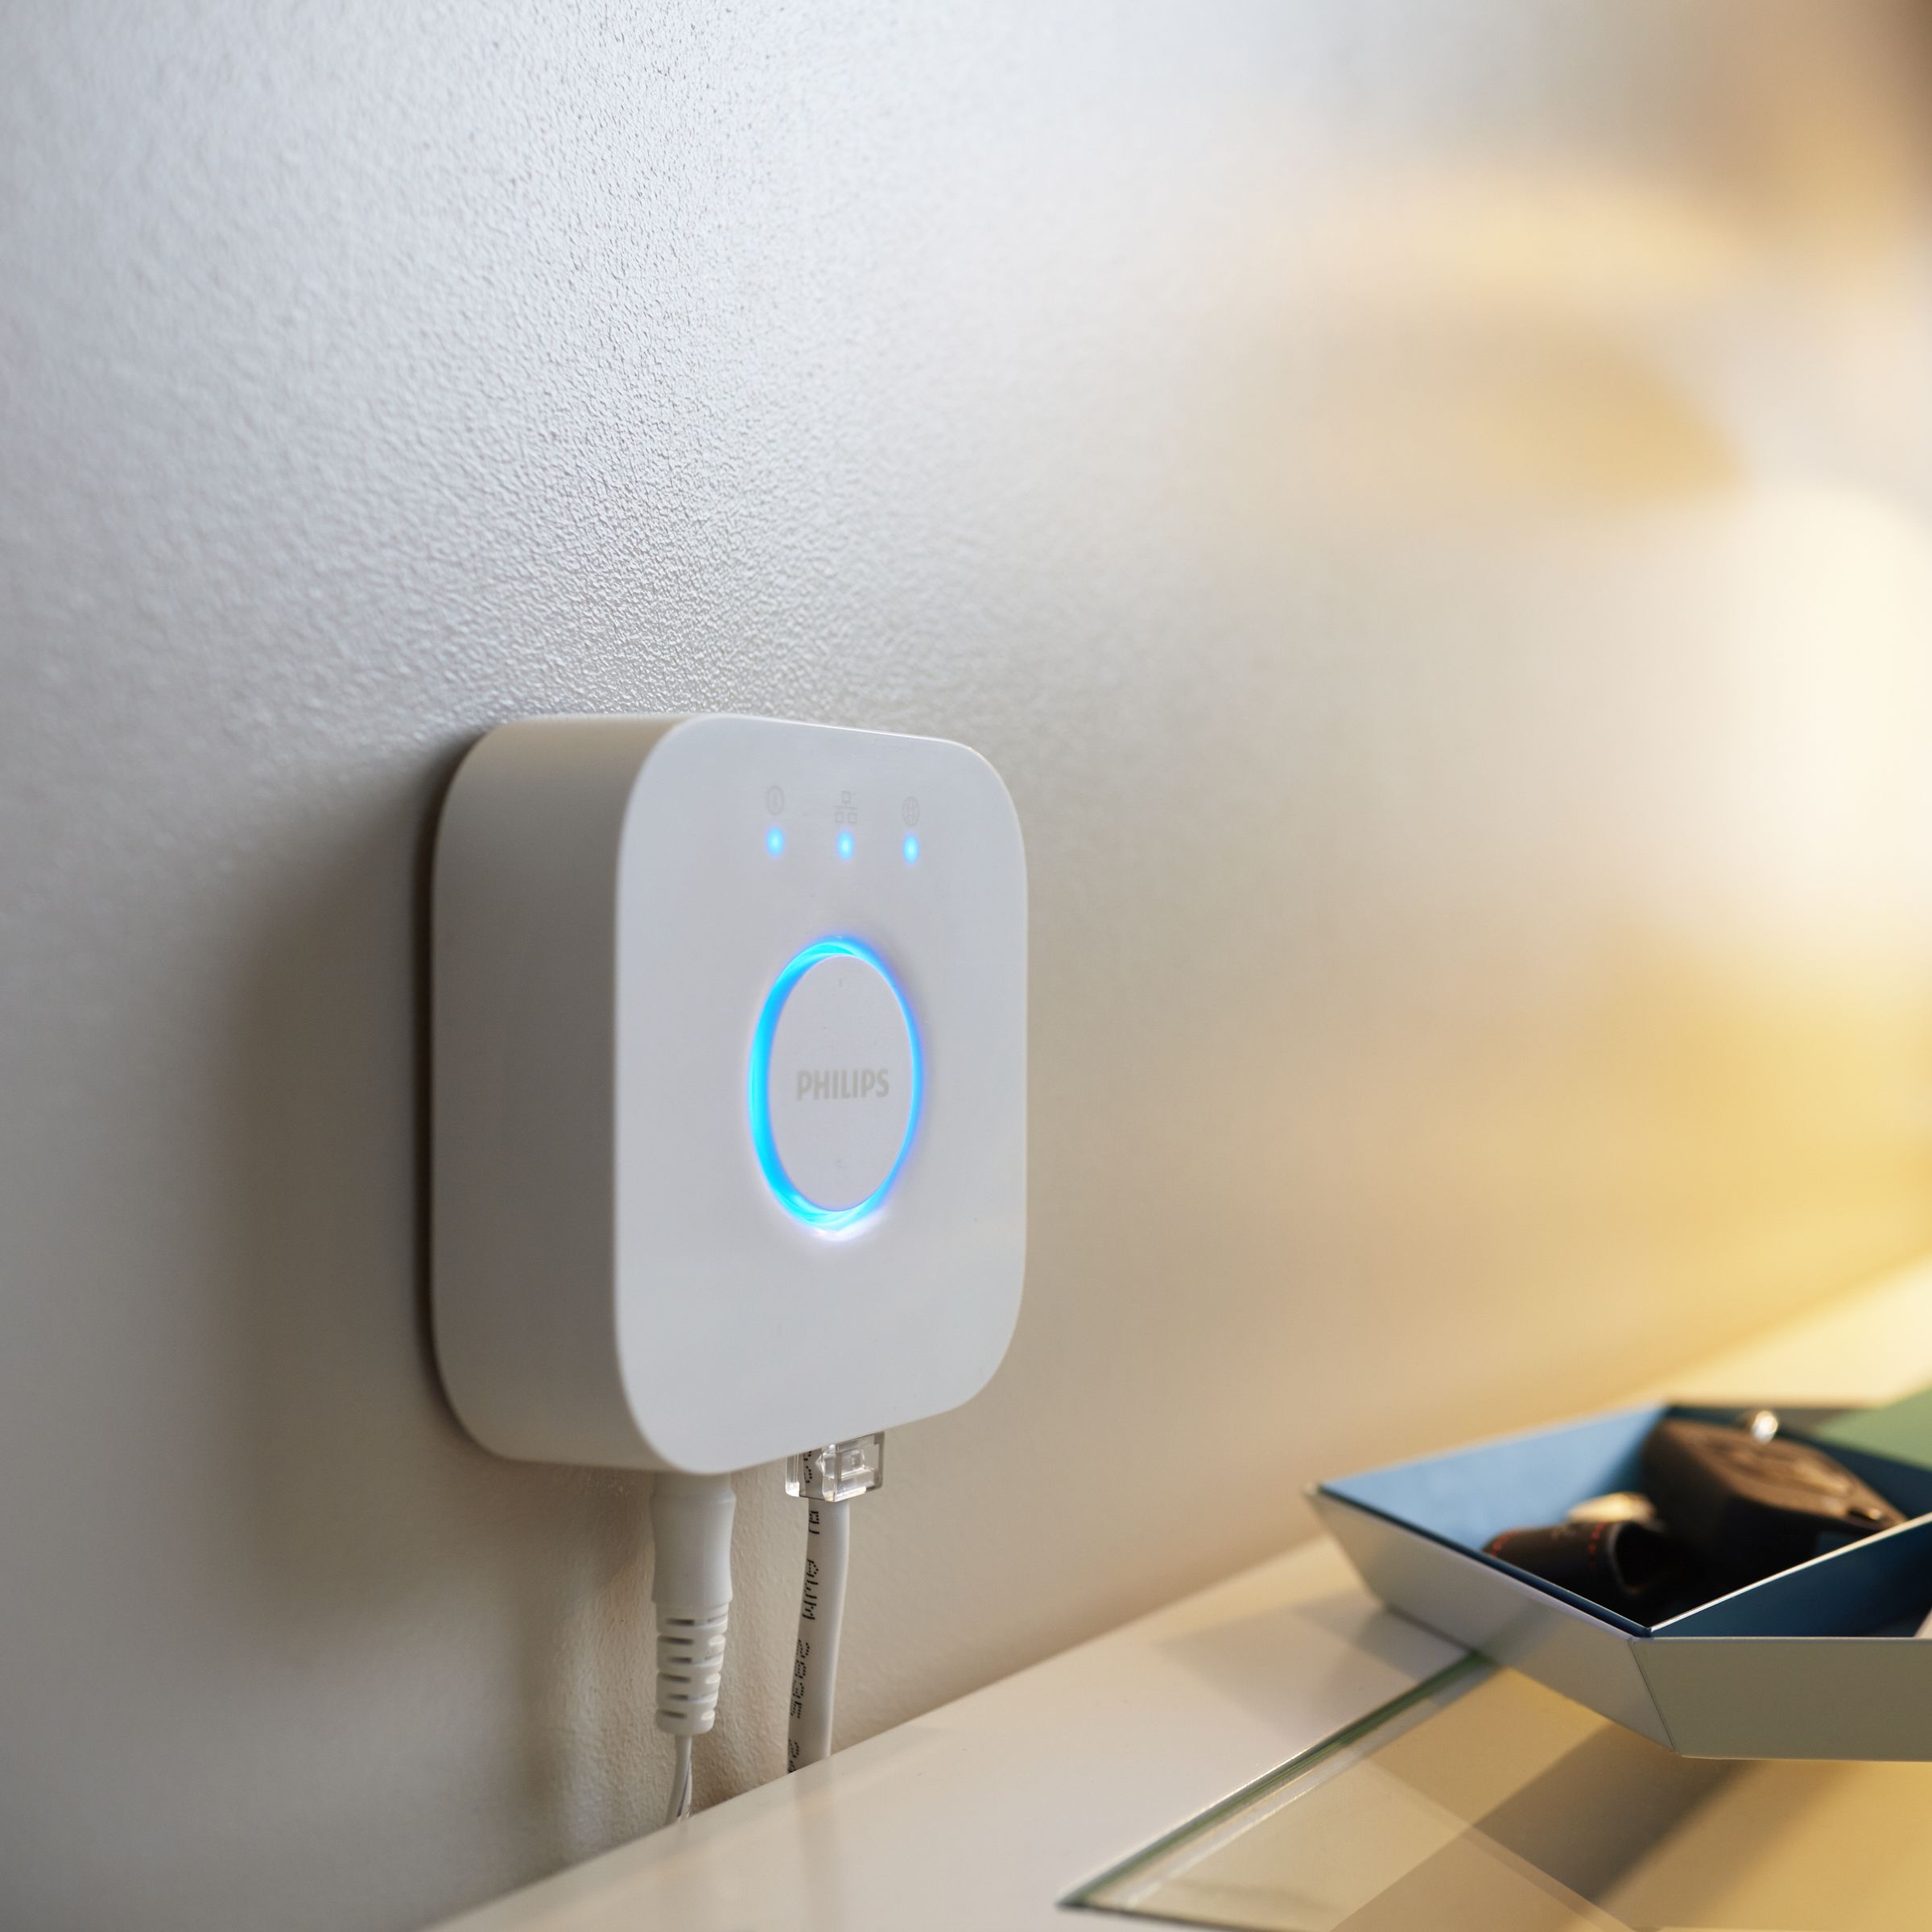 Philips Hue Bridge device shown wall-mounted above a table, near a lamp.